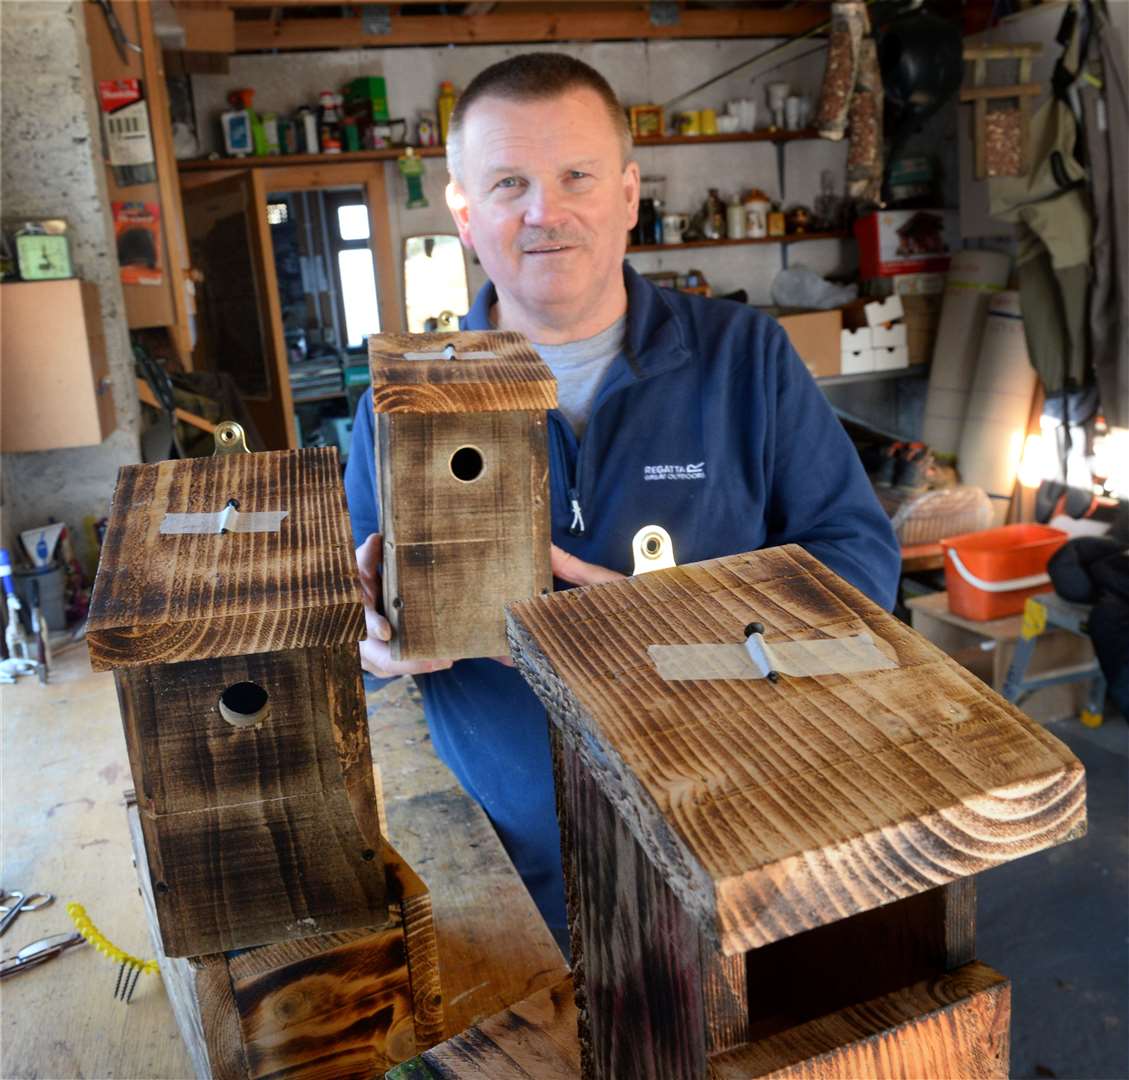 David McIntosh has been making and selling bird boxes to raise money for the Highland Hospice. Picture: Gary Anthony.